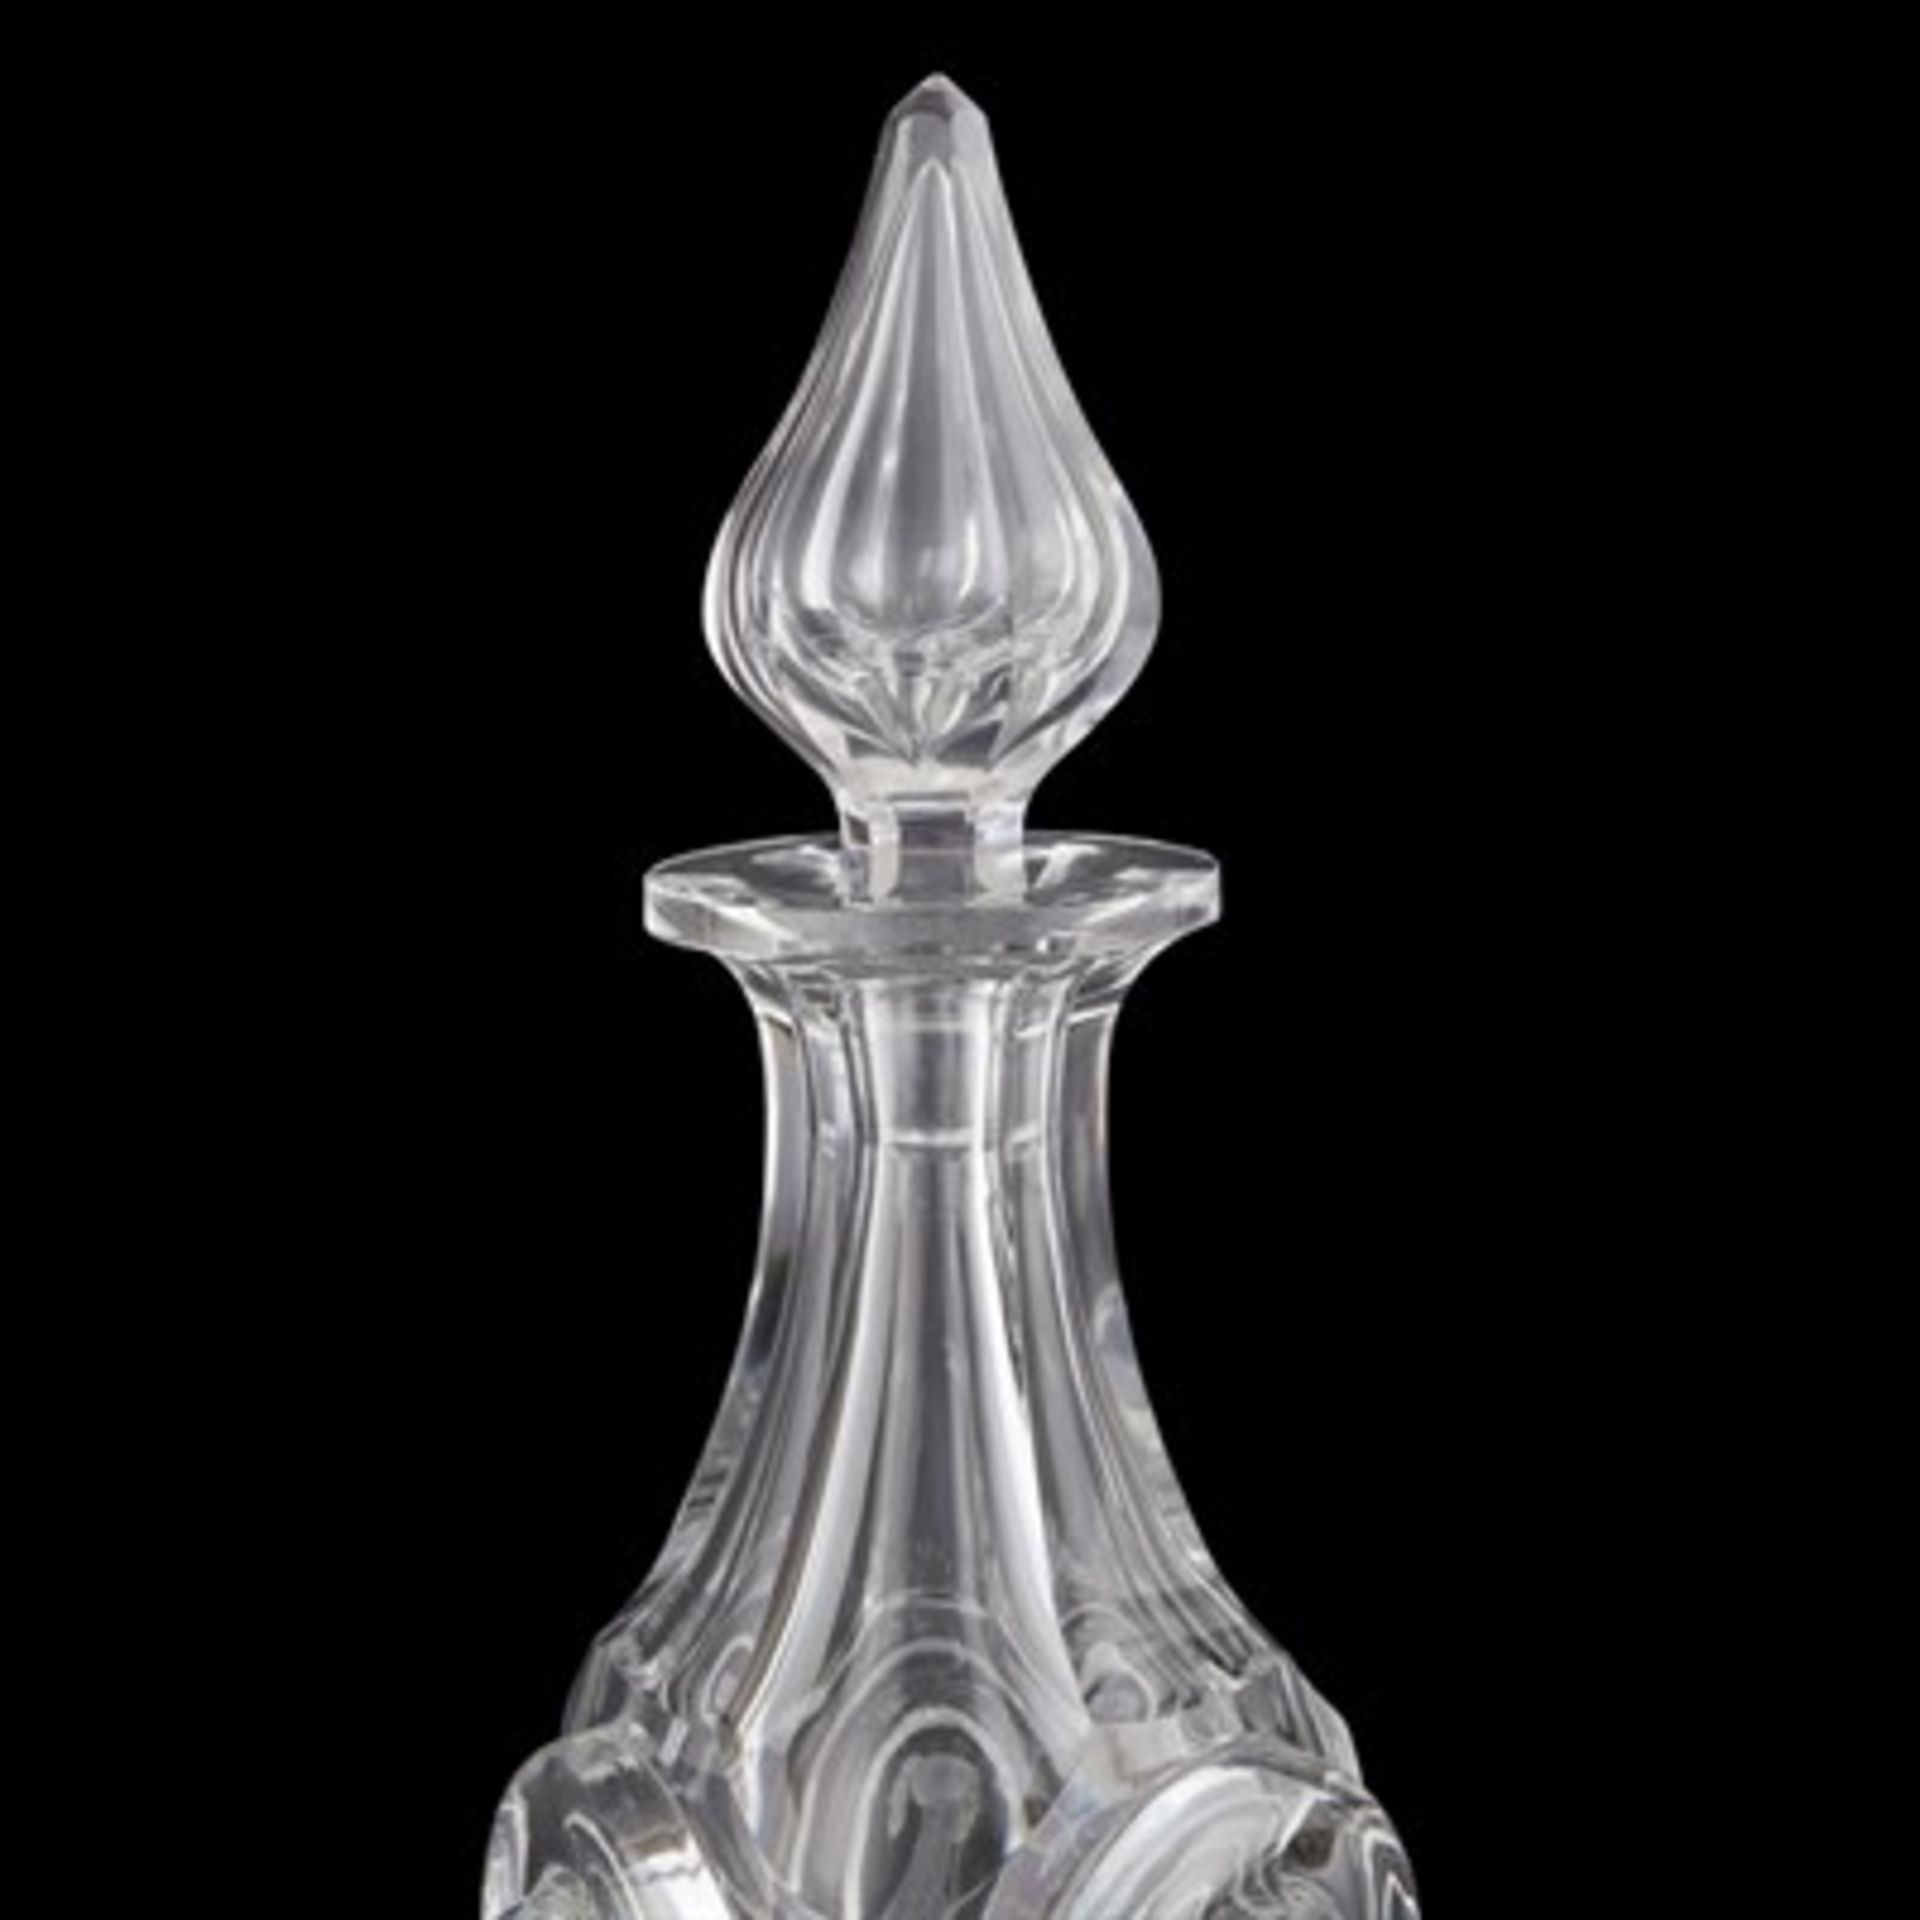 LARGE BOHEMIAN ENGRAVED DECANTER AND STOPPER, IN THE MANNER OF DOMINIK BIEMANN EARLY 19TH CENTURY - Image 4 of 4